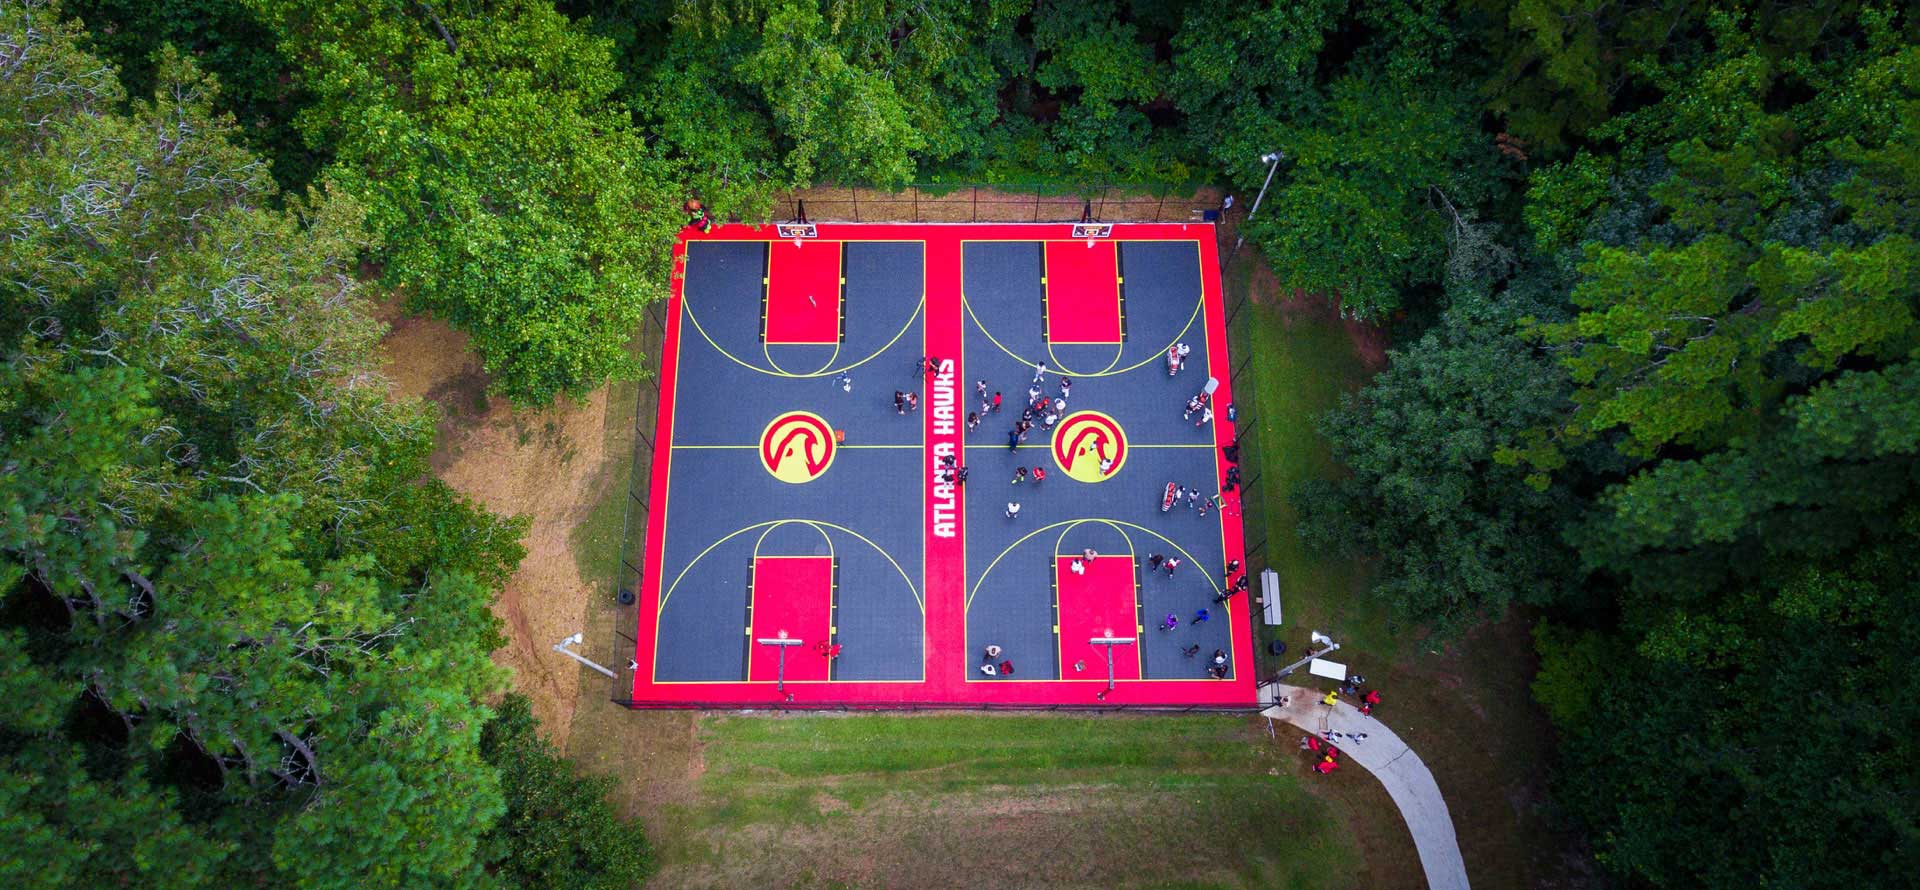 Hawks Outdoor Basketball Court — College Park Recreation and Cultural Arts